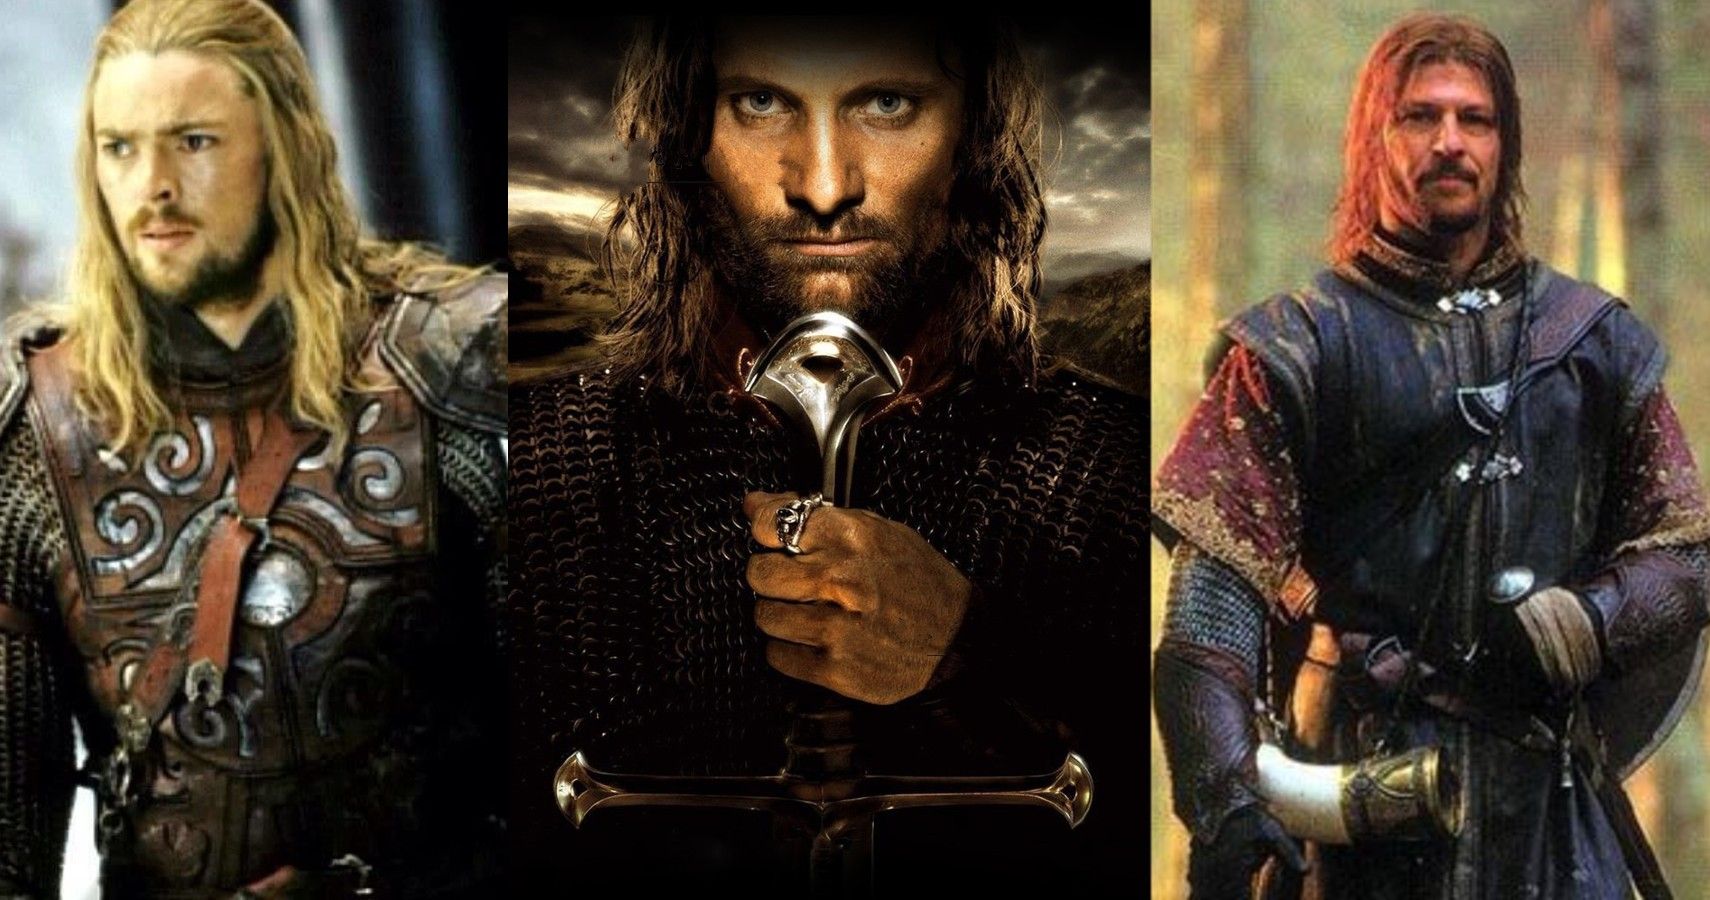 Erobrer Mos New Zealand The Lord Of The Rings: The 10 Most Powerful Humans, Ranked